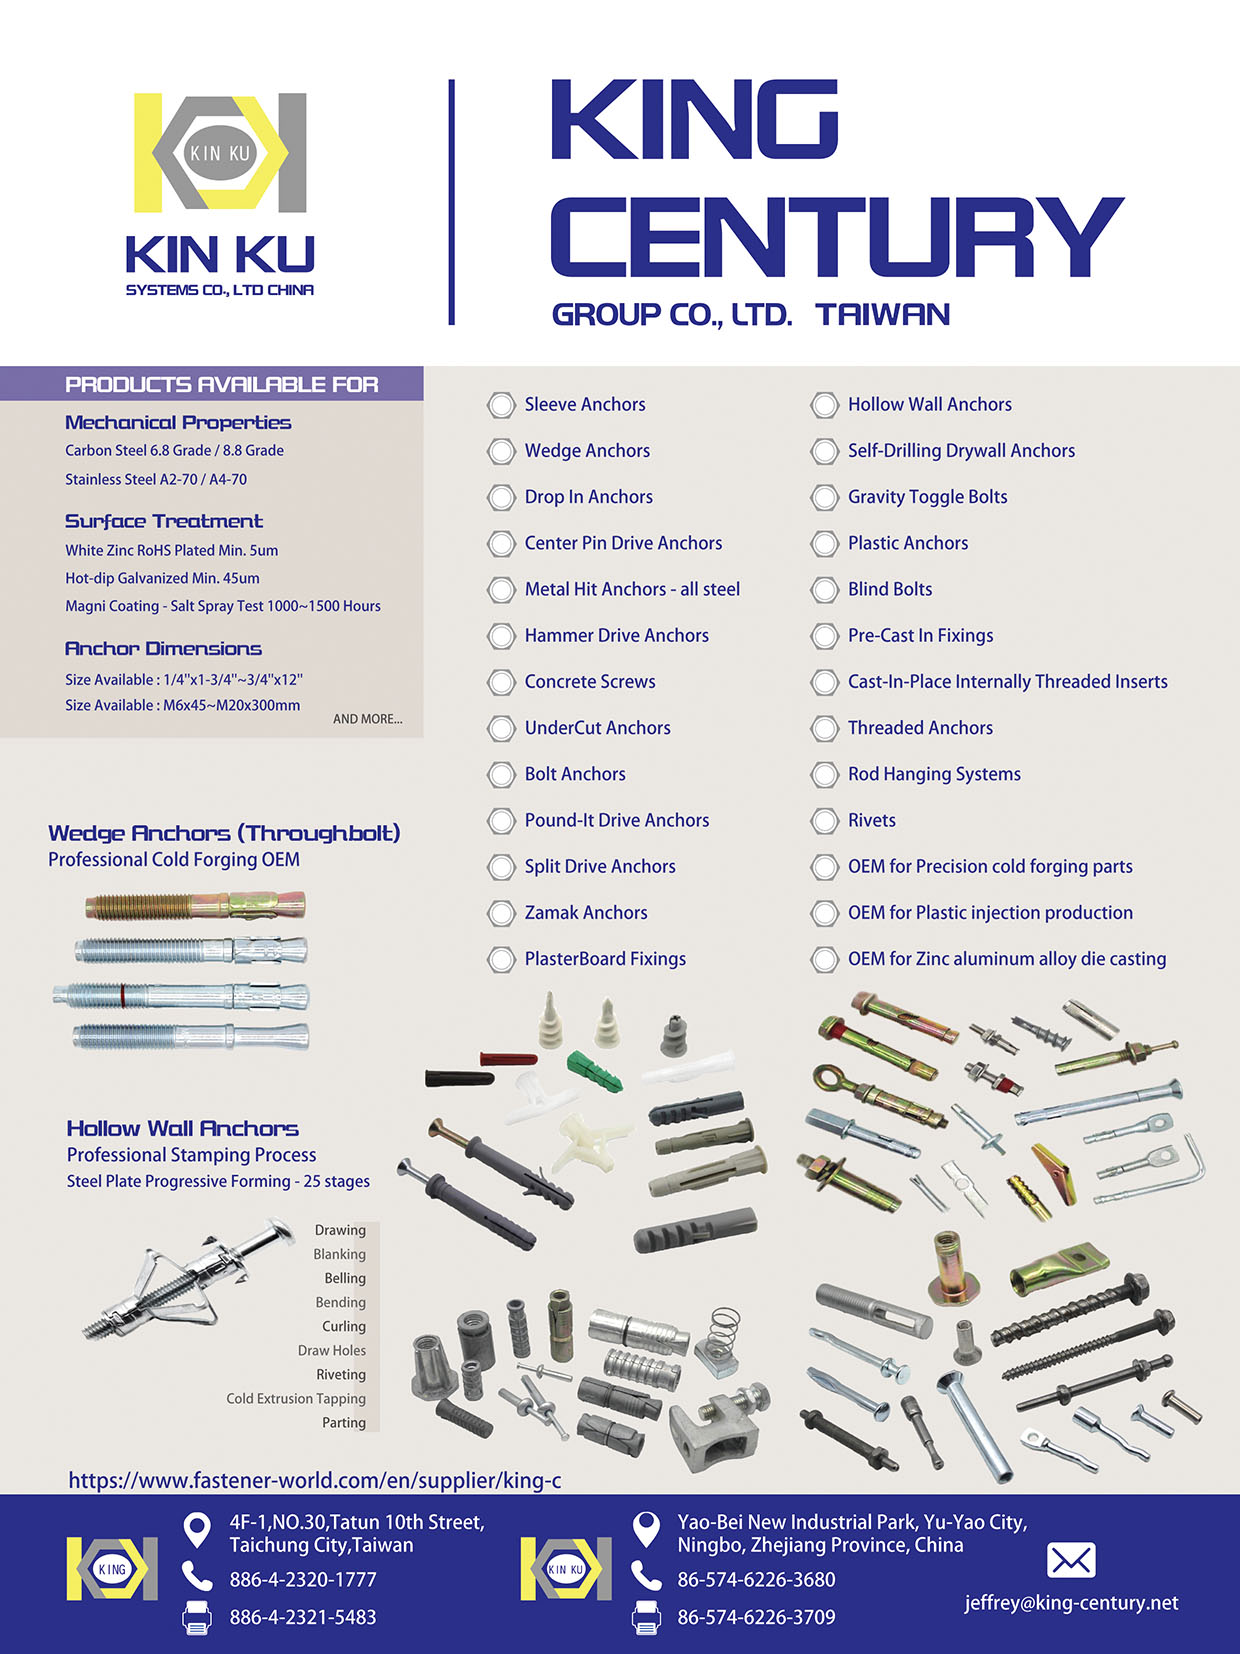 KING CENTURY GROUP CO., LTD. , Sleeve Anchors,Wedge Anchors,Drop In Anchors,Drop In Anchors,Center Pin Drive Anchors,Metal Hit Anchors-all steel,Hammer Drive Anchors,Concrete Screw,Under Cut Anchors,Bolt Anchors,Pound-It Drive Anchors,Split Drive Anchors,Zamak Anchors,Plaster Board Fixings,Hollow Wall Anchors,Self-Drilling Drywall Anchors,Gravity Toggle Bolts,Plastic Anchors,Blind Bolts,Pre-Cast In Fixings,Cast-In-Place Internally Threaded Inserts,Threaded Anchors,Rod Hanging Systems,Rivets,OEM for Precision cold forging parts,OEM for Plastic injection Production,OEM for Zinc aluminum alloy die casting